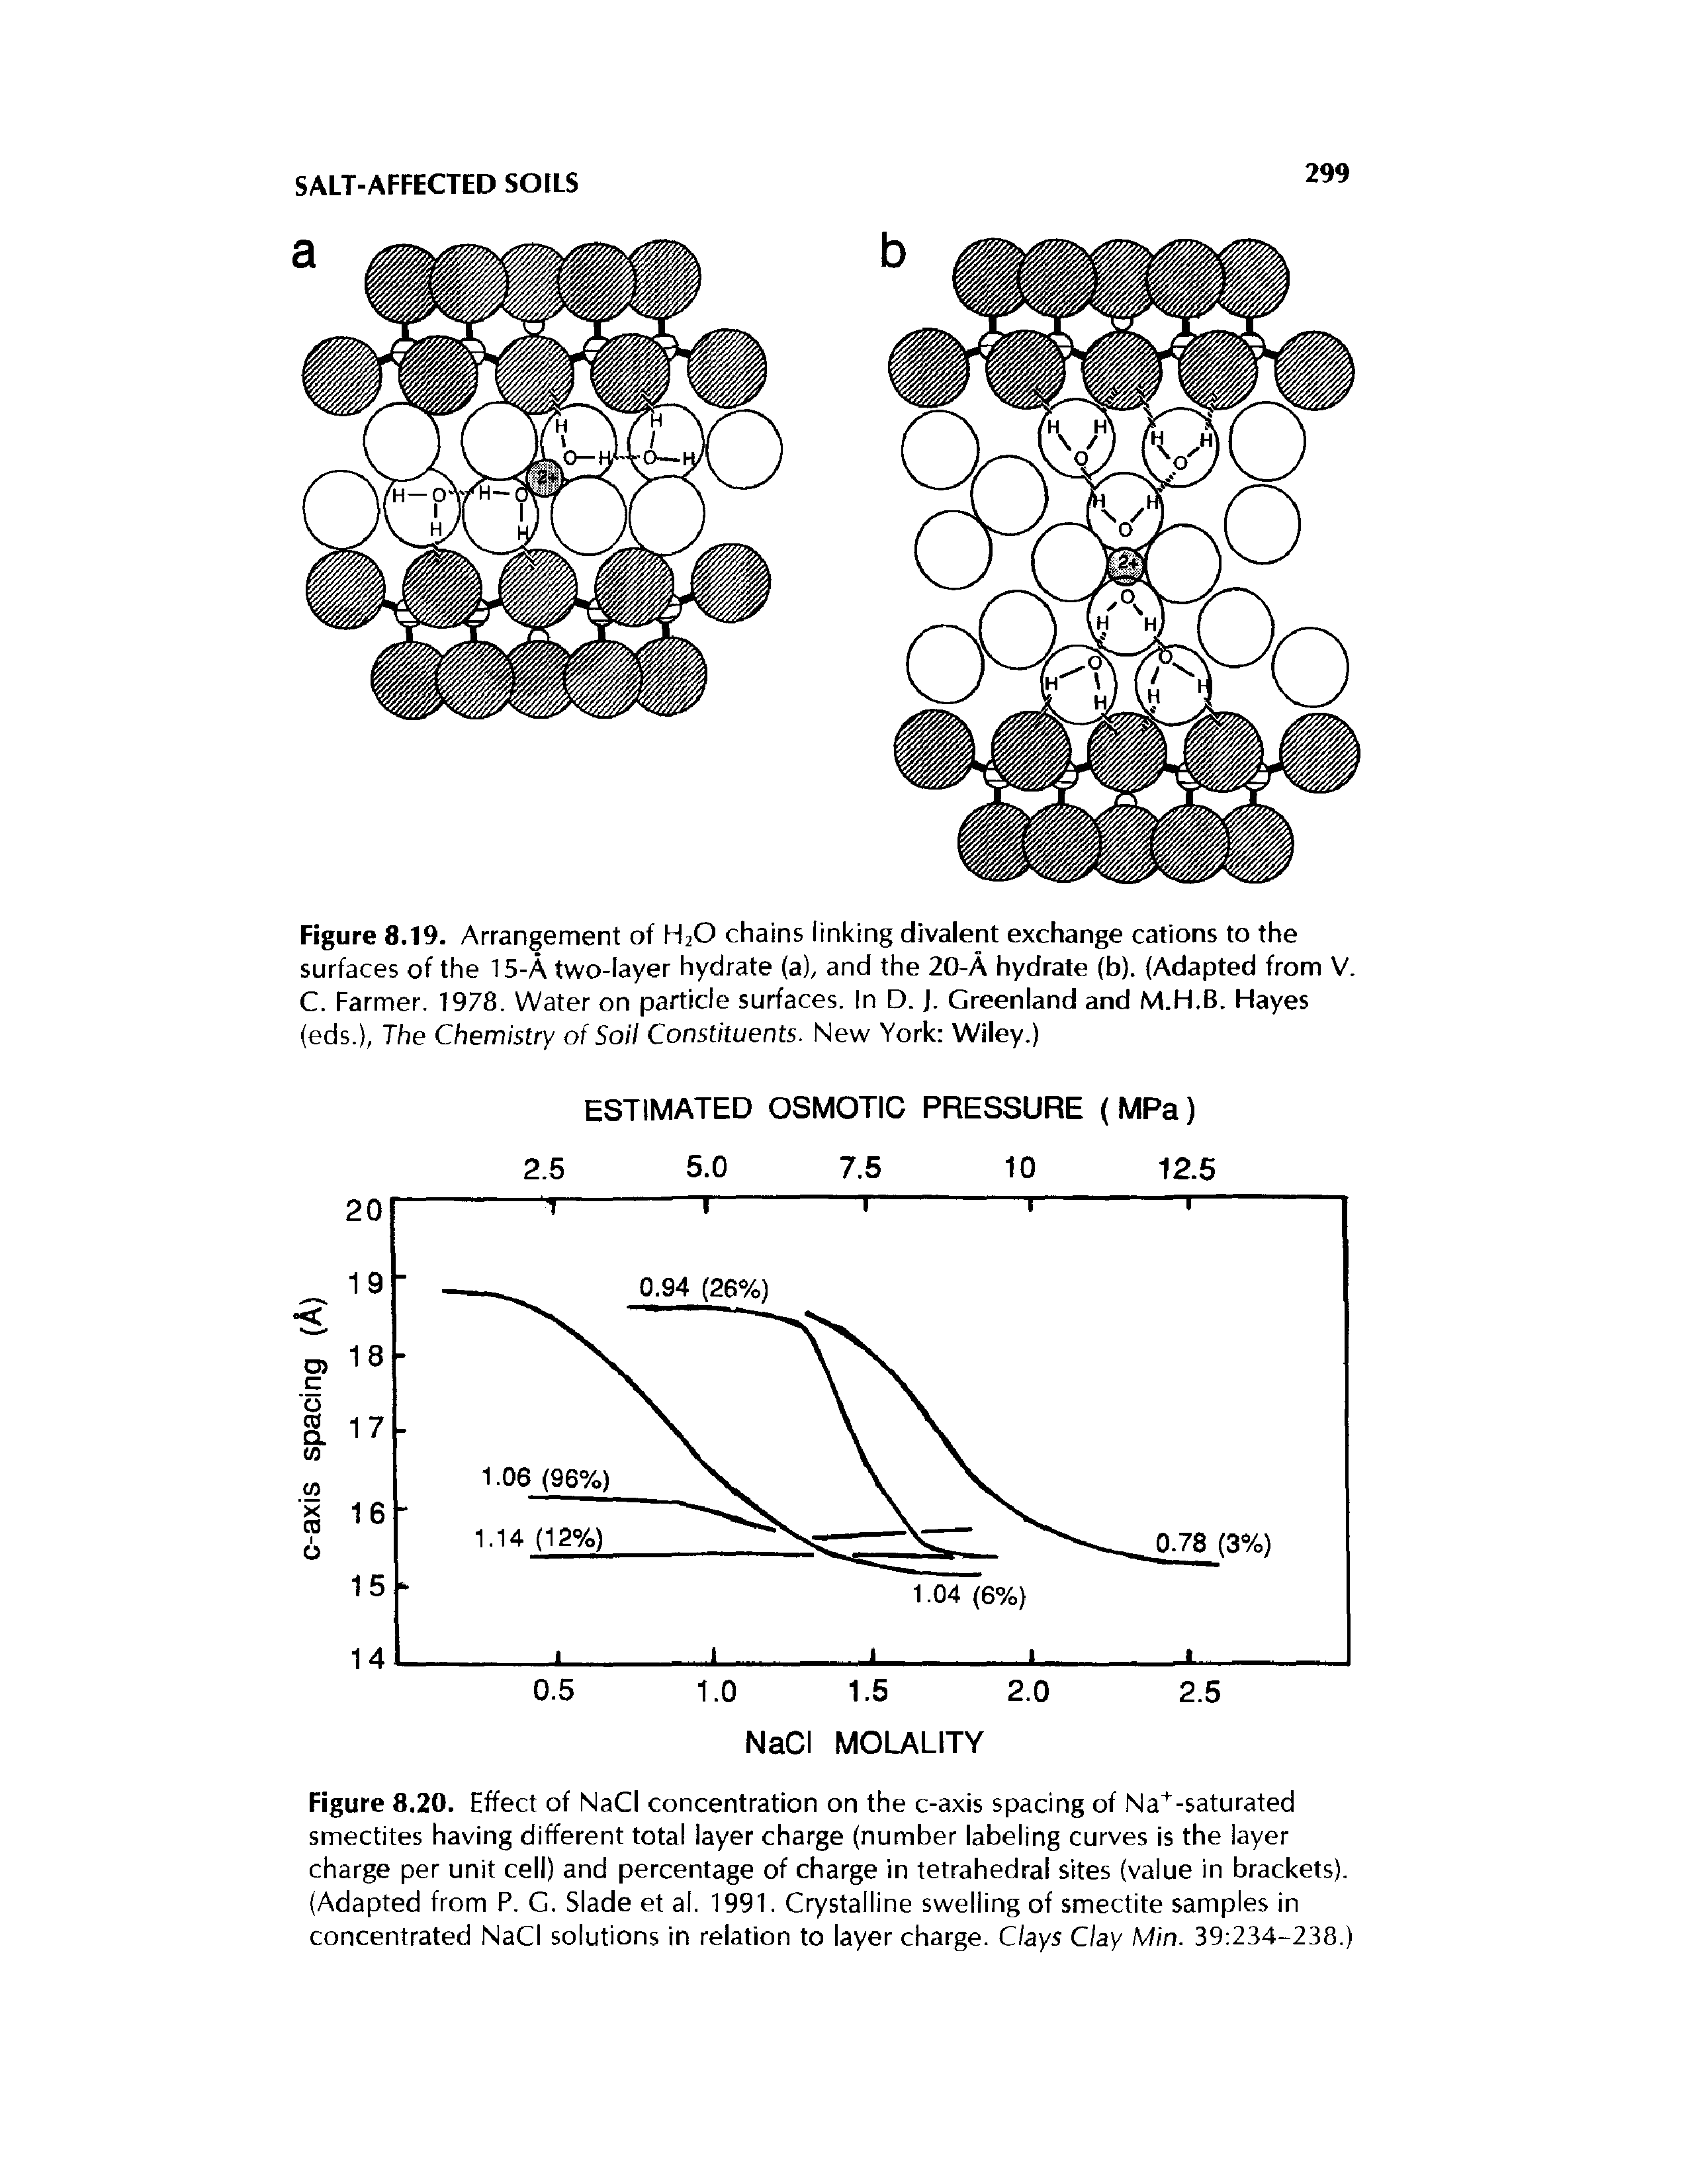 Figure 8.19. Arrangement of H2O chains linking divalent exchange cations to the surfaces of the 15-A two-layer hydrate (a), and the 20-A hydrate (b). (Adapted from V.